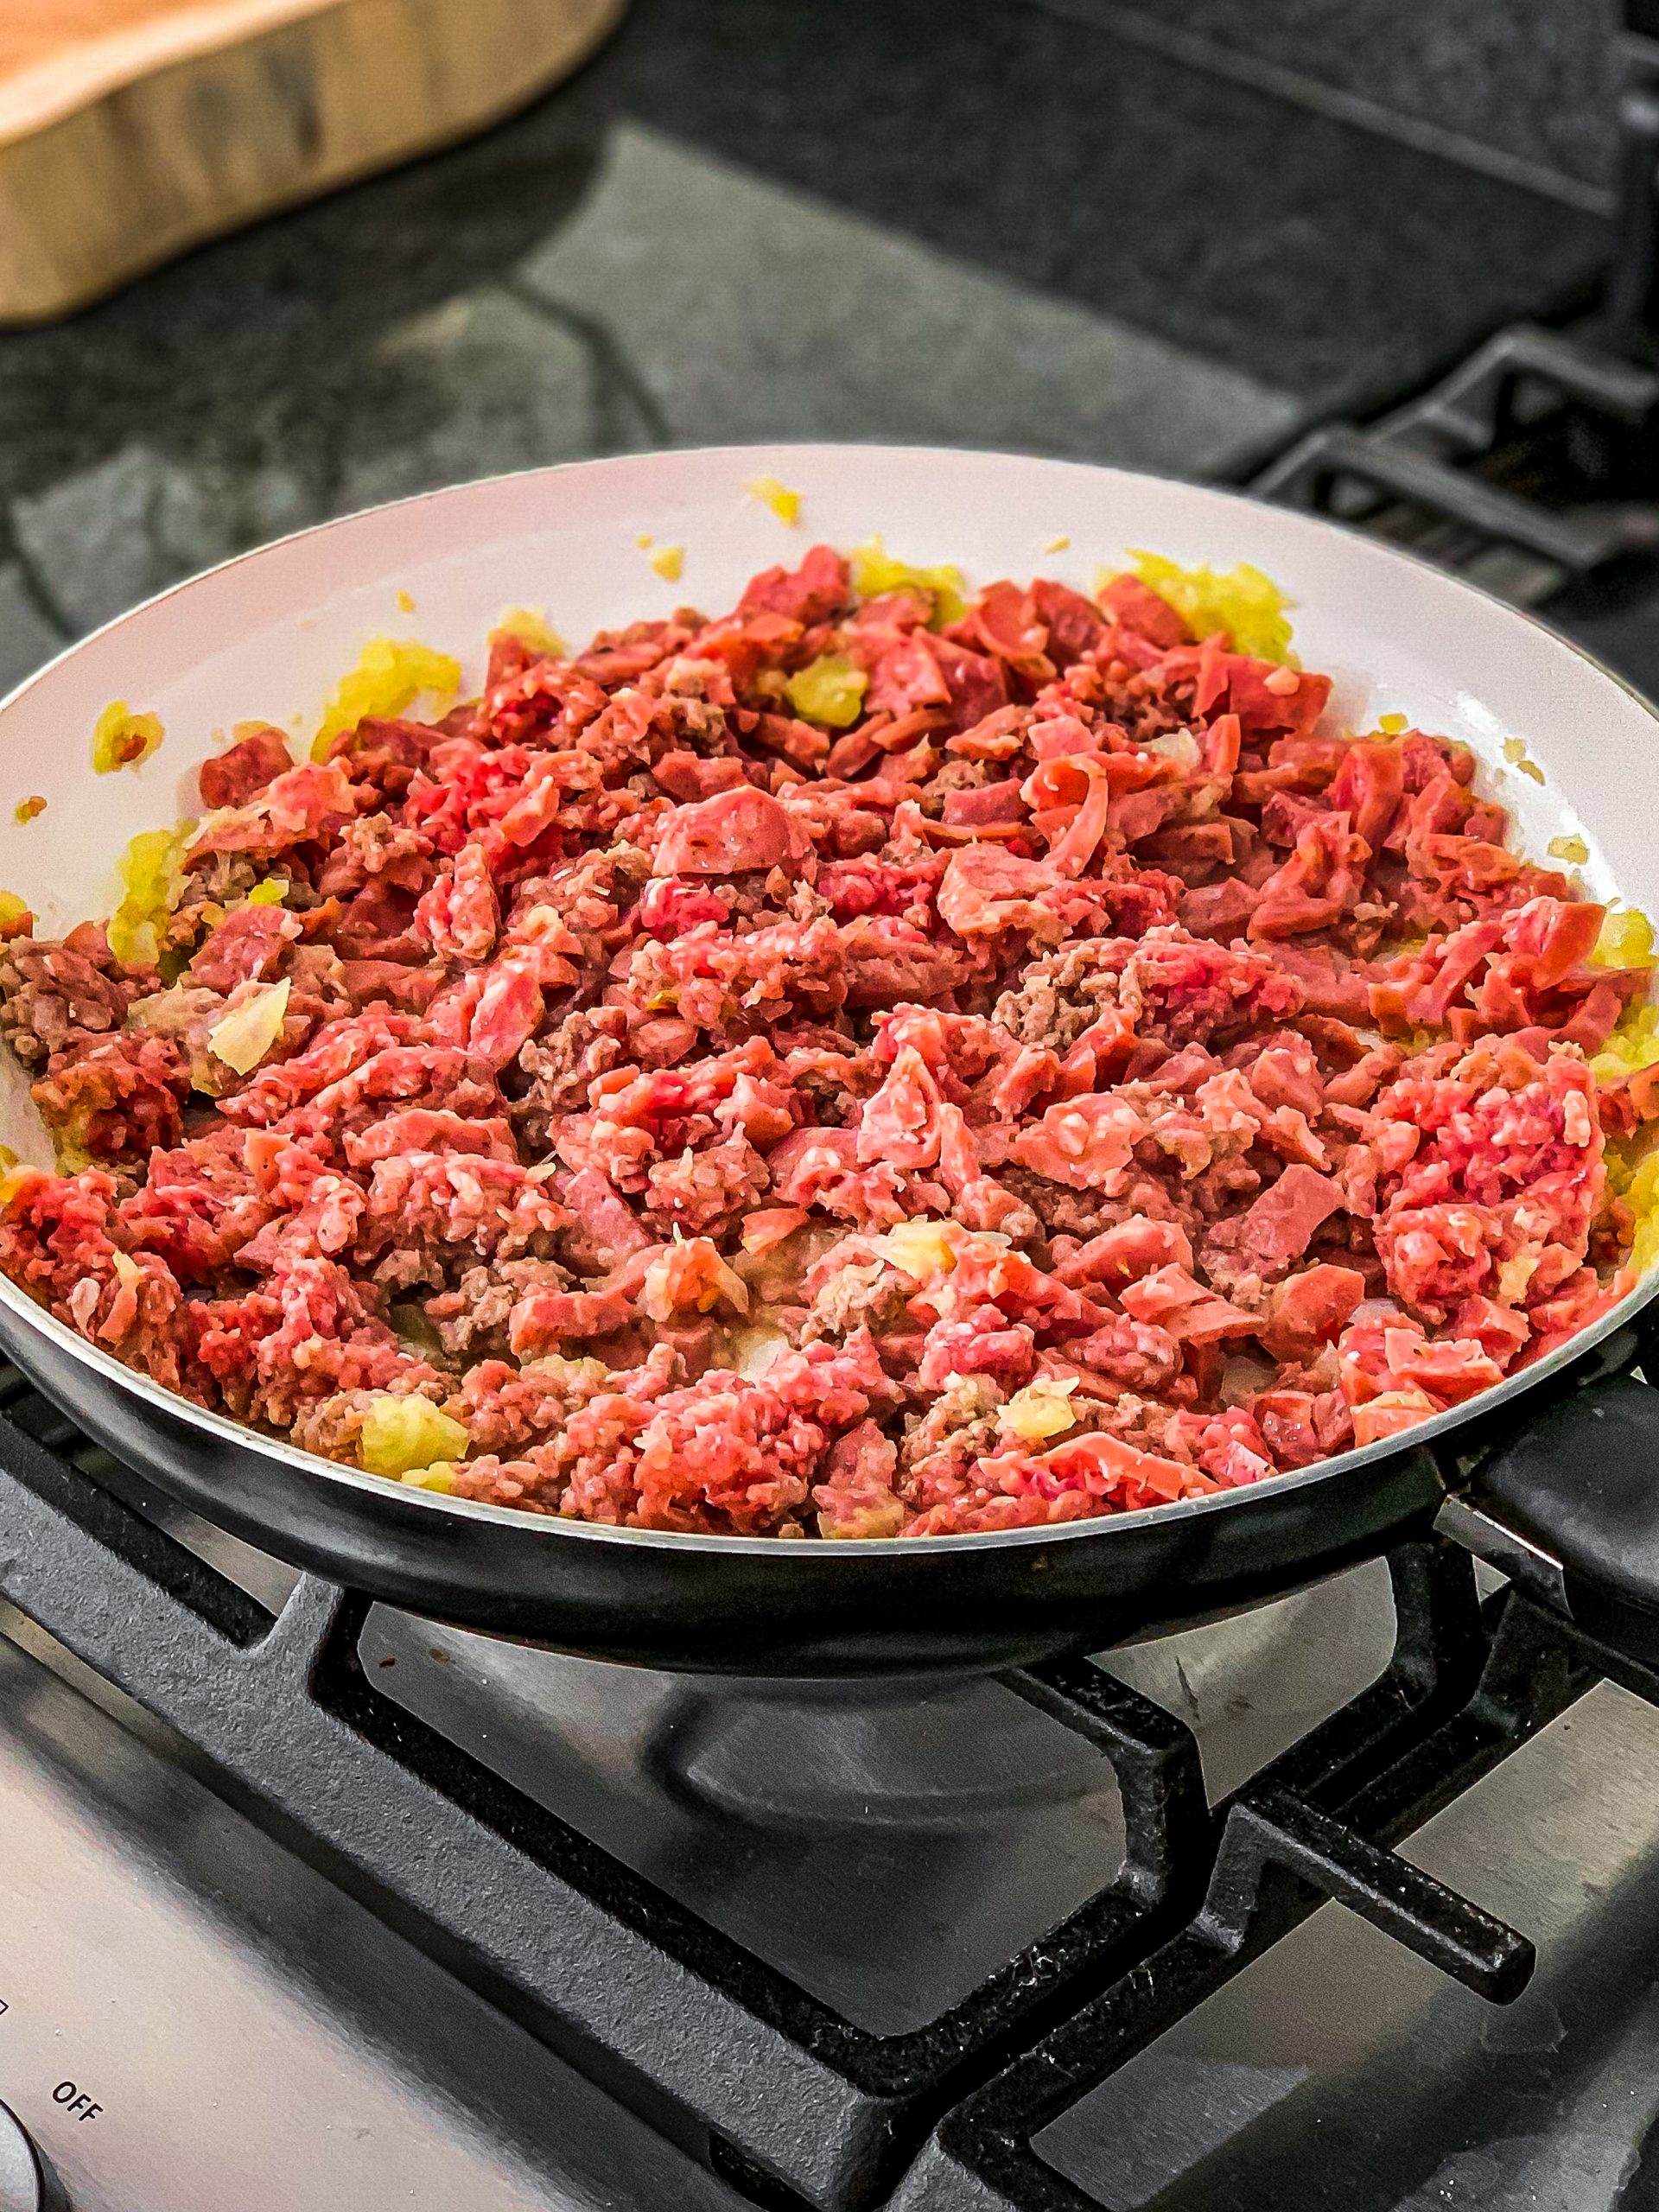 Add the ground beef along with the sausage, and cook until golden brown.